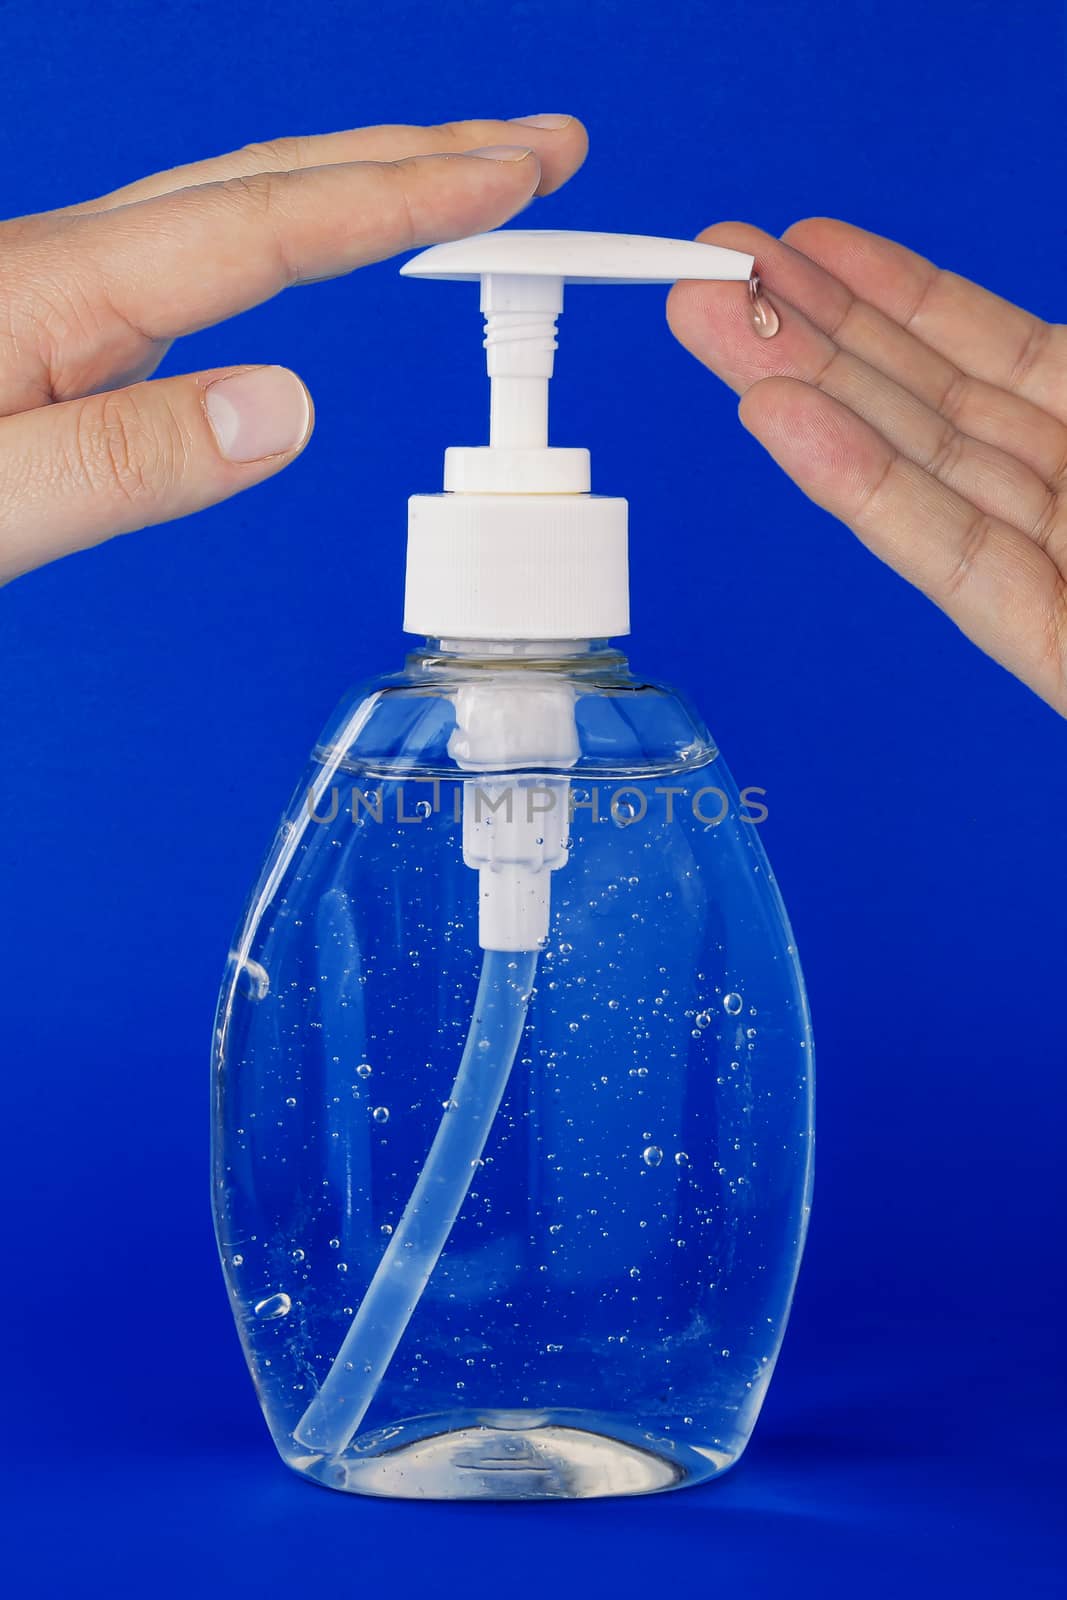 A close up of a person applying hand sanitizer on a dark blue background by oasisamuel